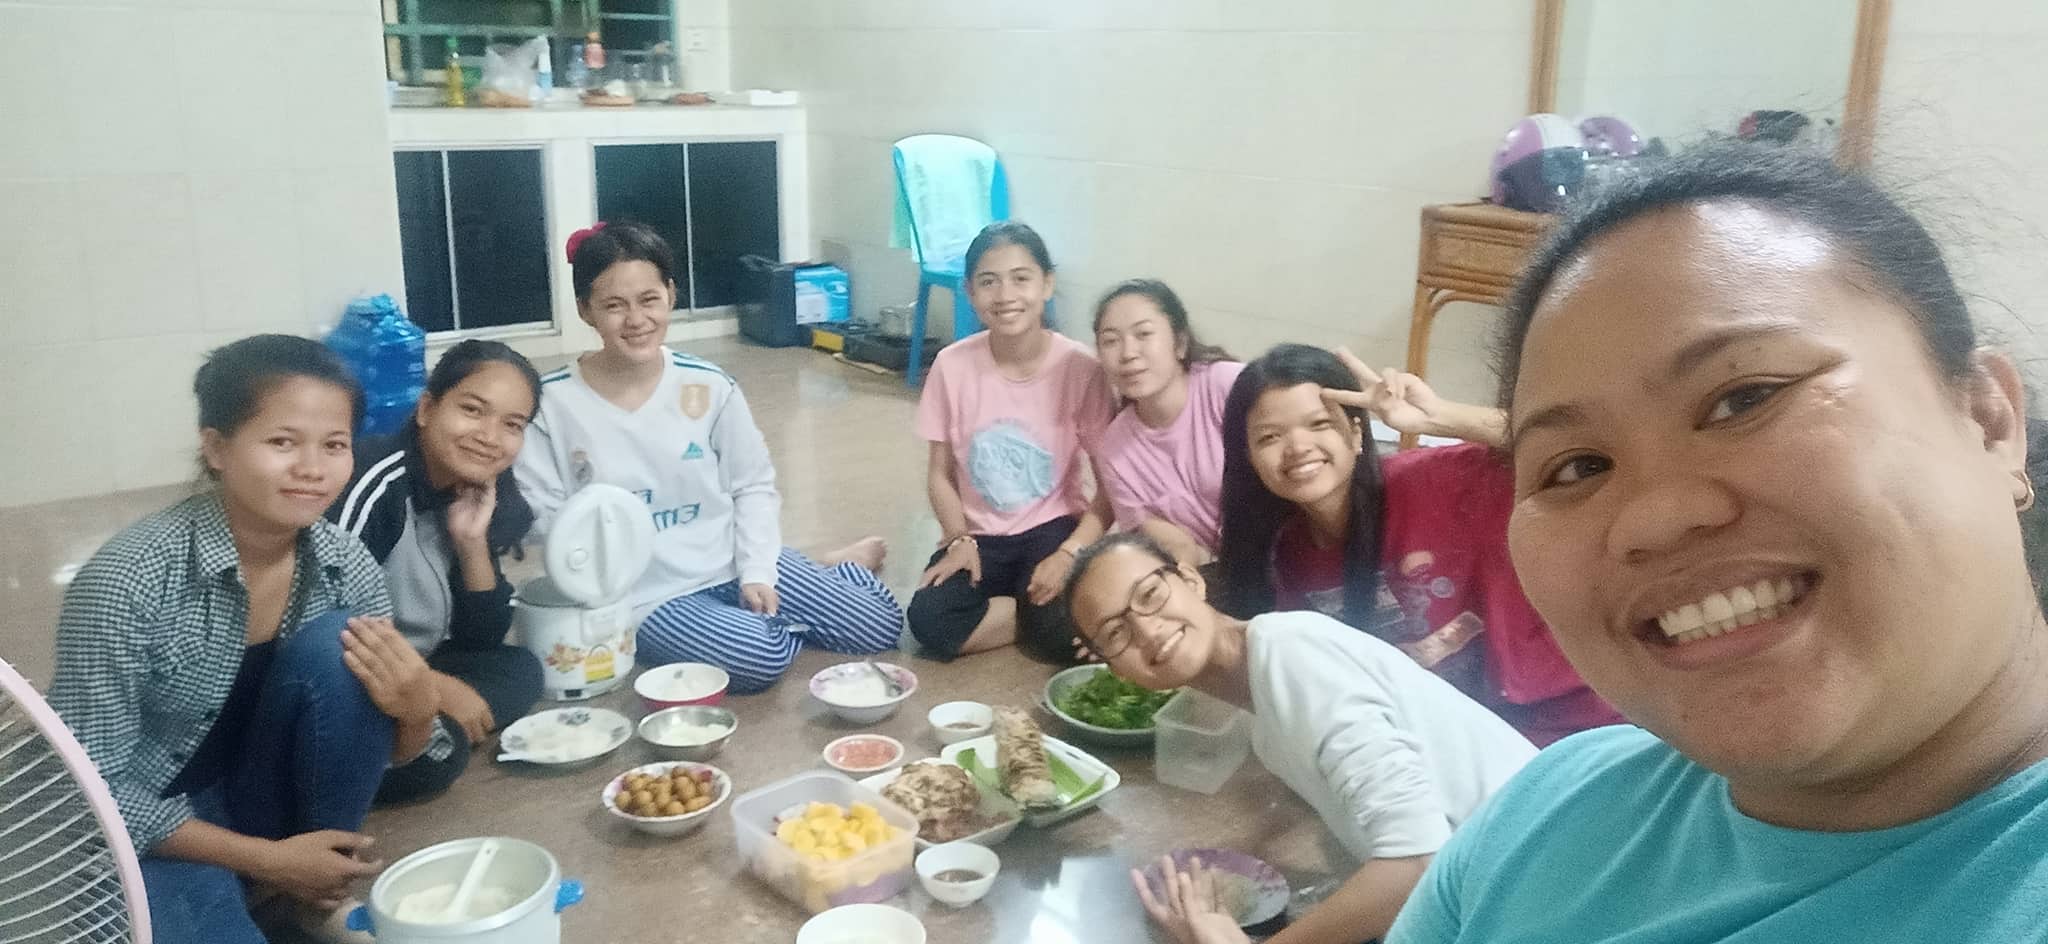 Students in dormitory during monthly dinner fellowship